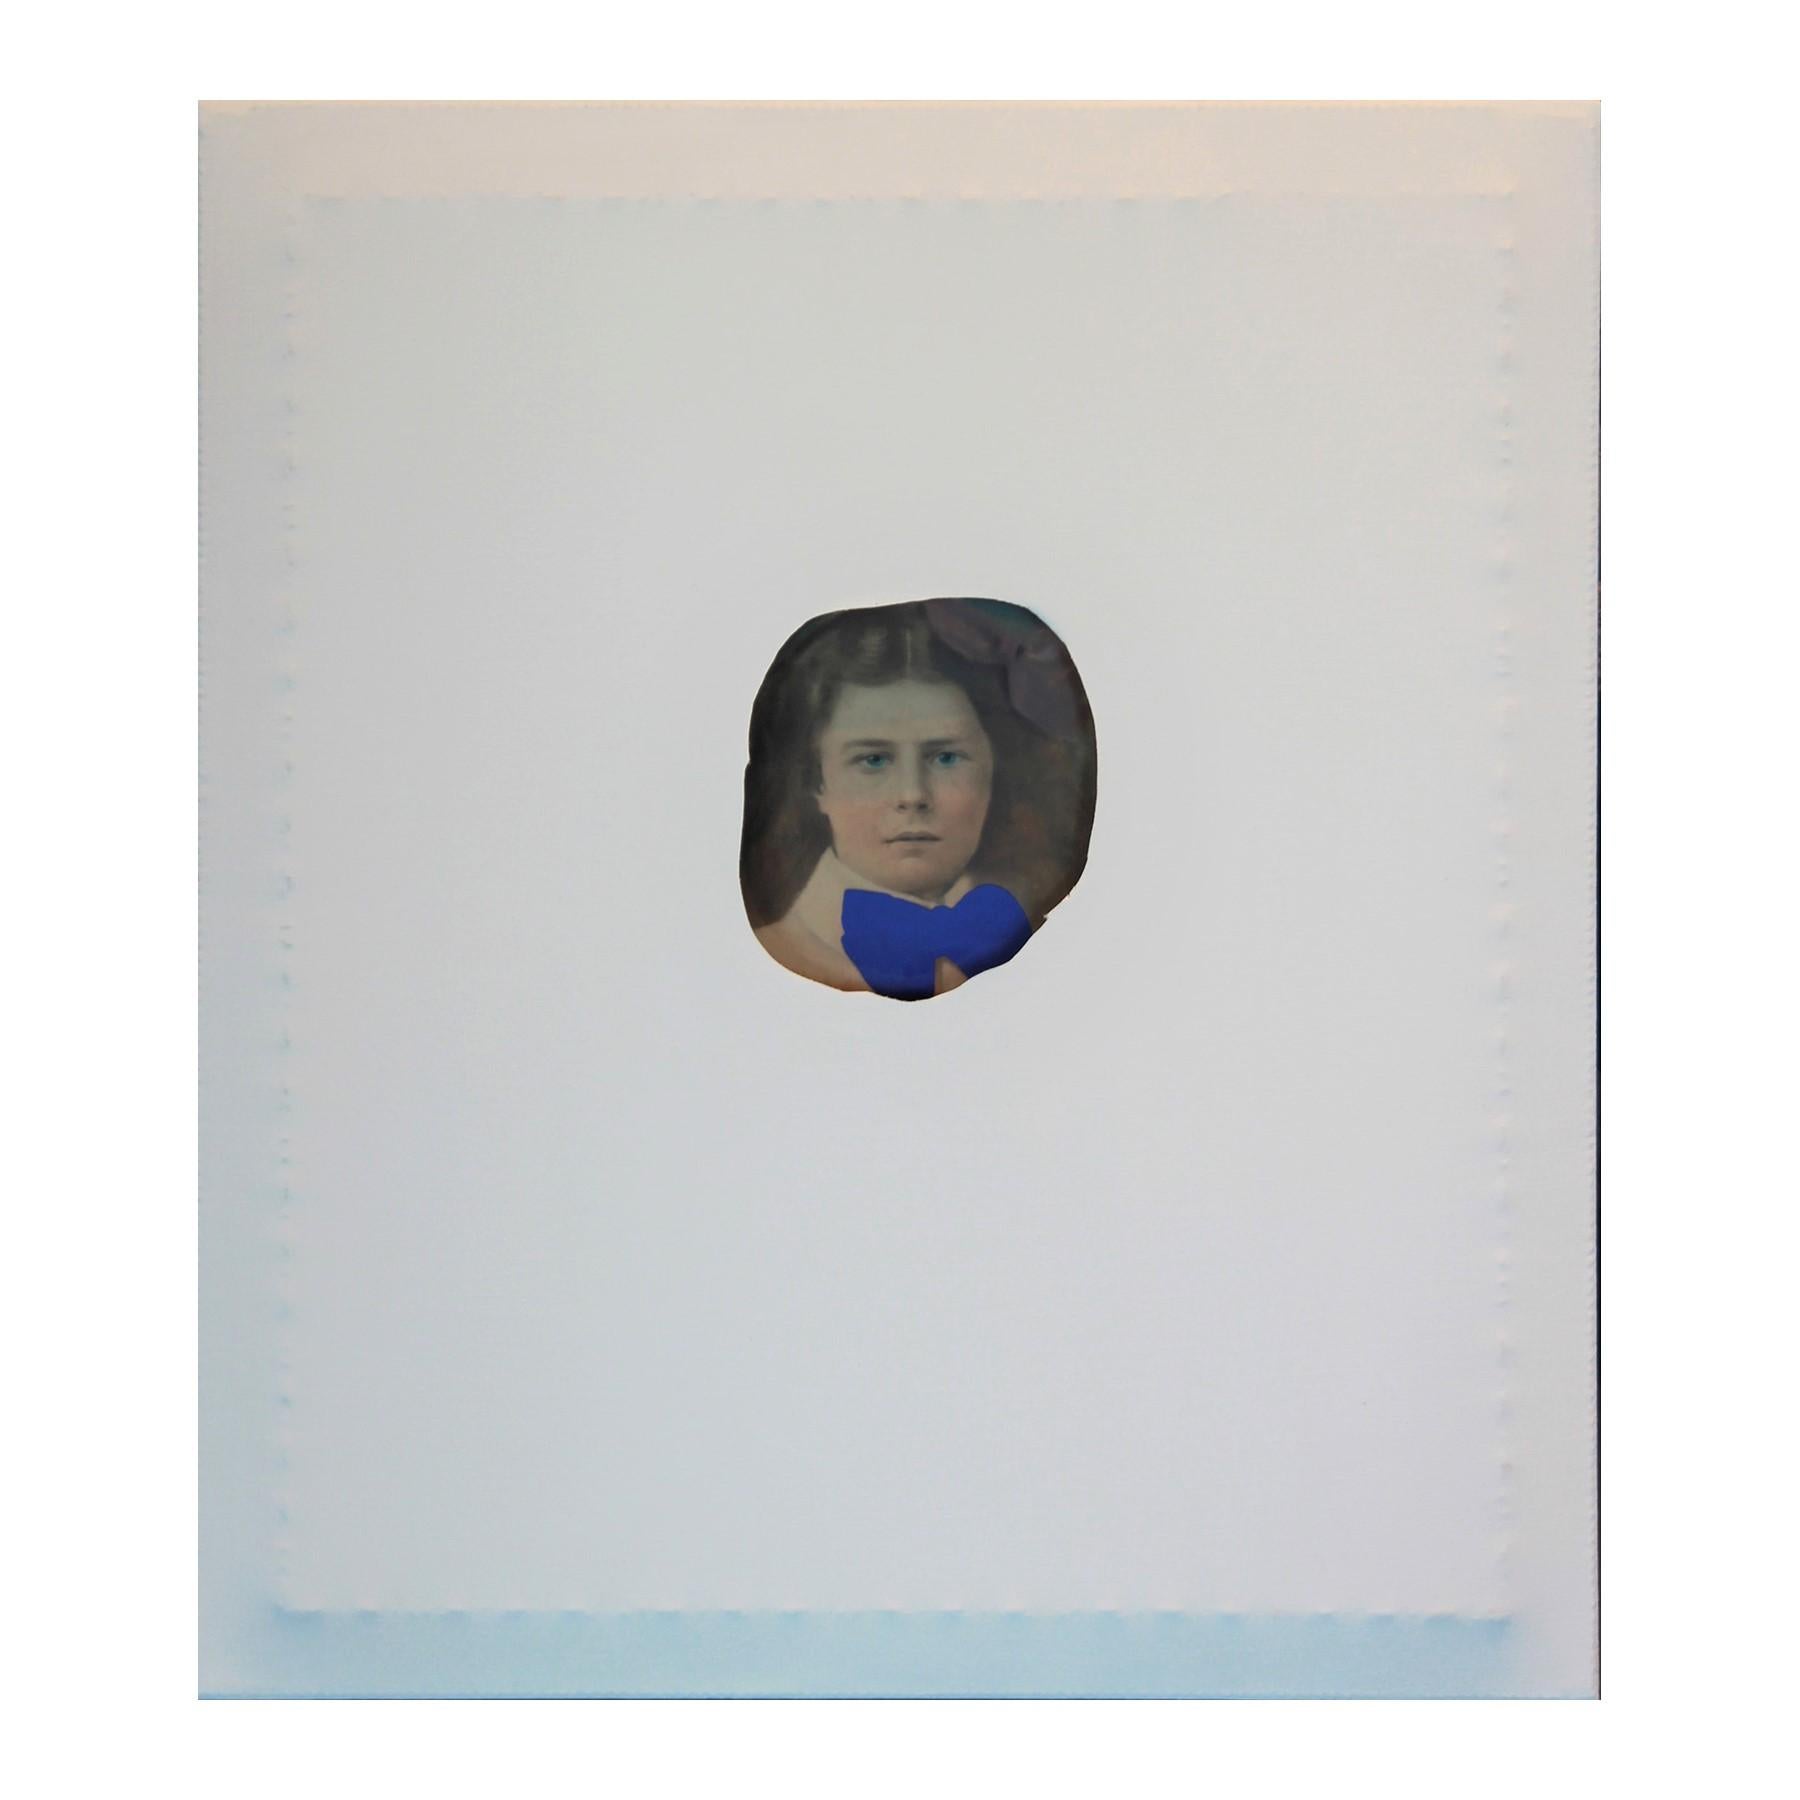 Matthew Reeves Portrait Painting - White Canvas Wrapped Portrait with Bright Blue Bow Tie